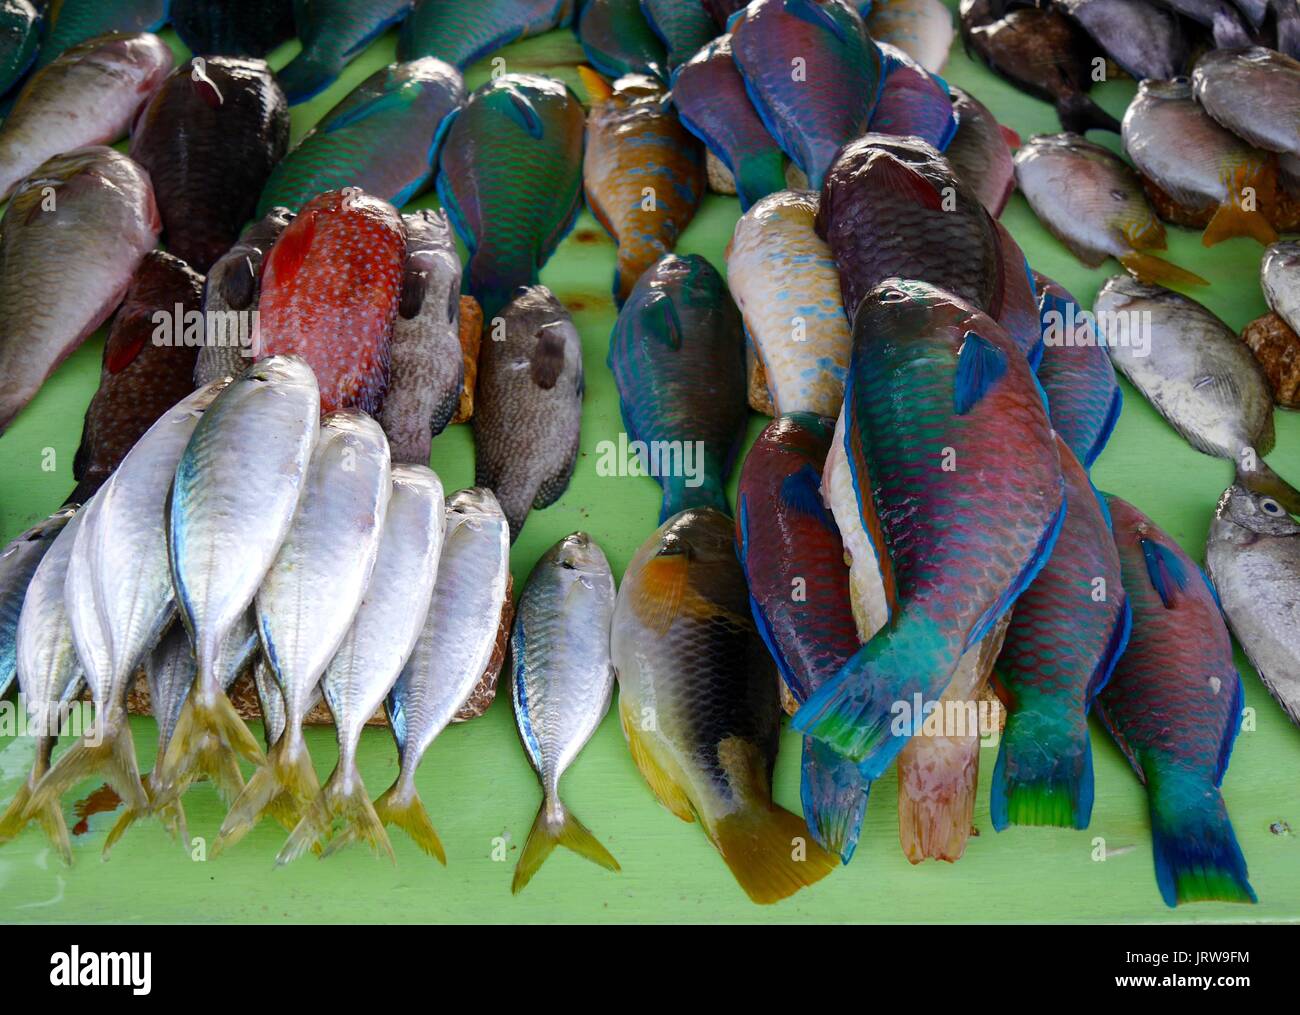 A surprisingly colourful display of fresh fish on display, with several bright blue species, at a beachside stall near Kupang, West Timor, Indonesia Stock Photo